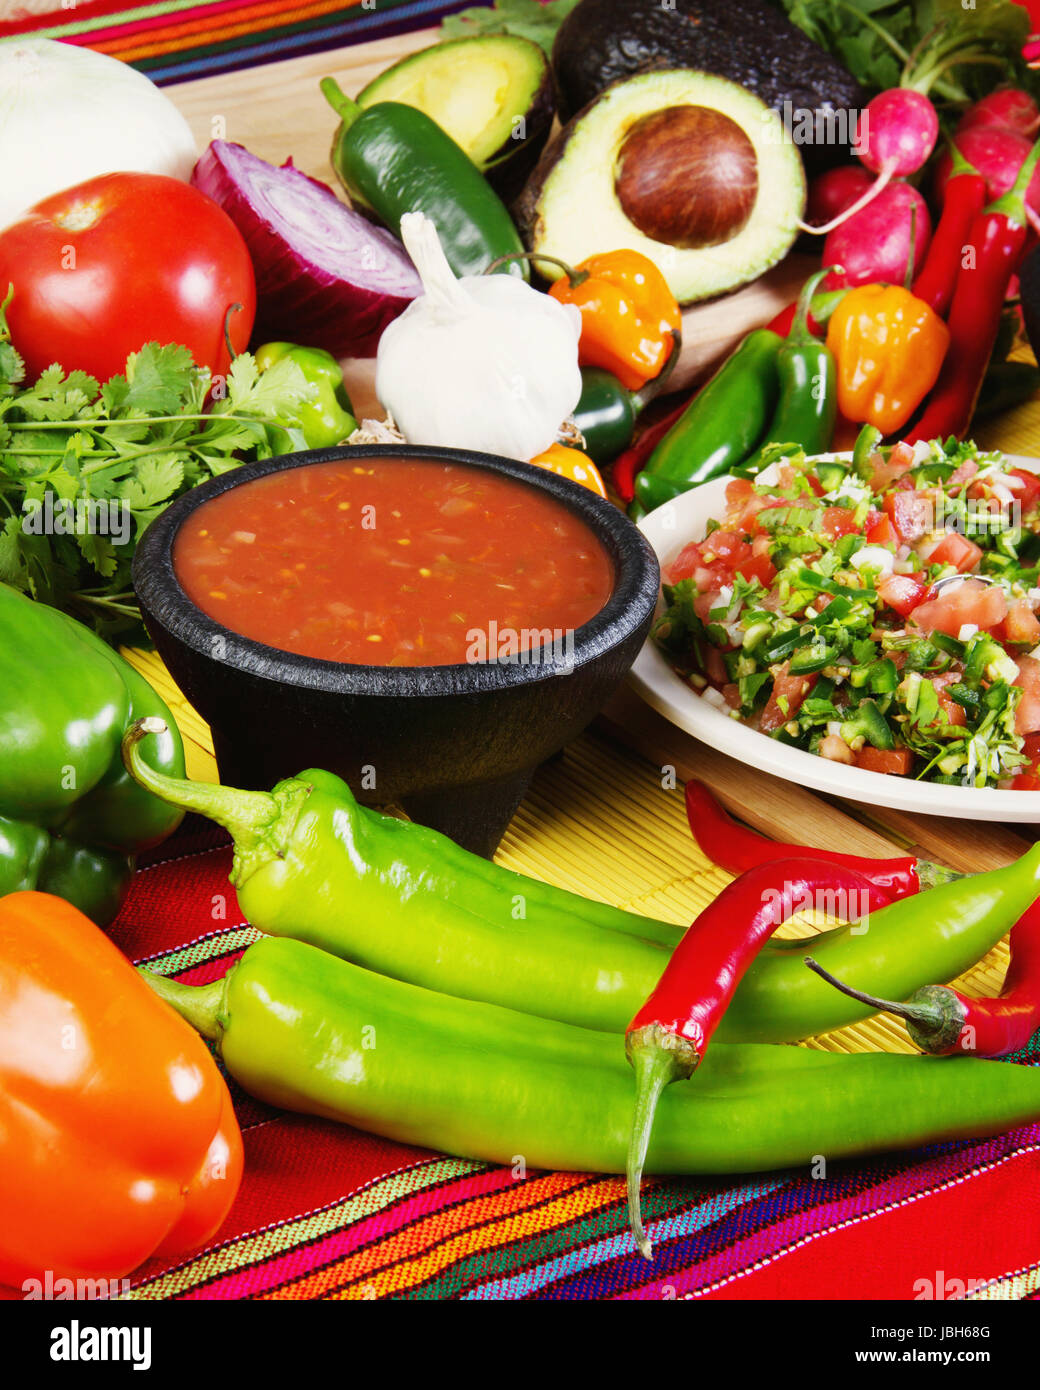 https://c8.alamy.com/comp/JBH68G/stock-image-of-traditional-mexican-food-salsas-and-ingredients-JBH68G.jpg